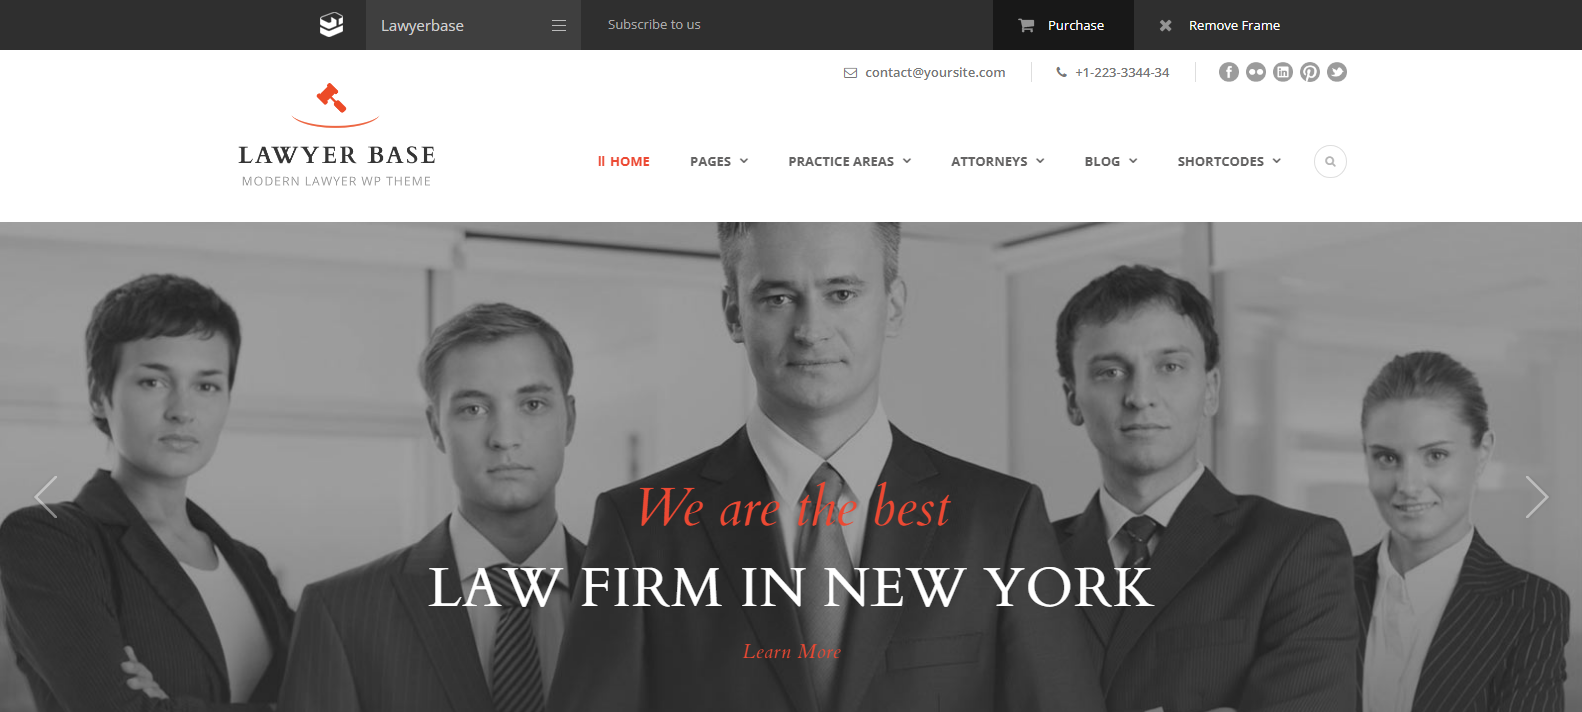 Lawyer Base - Attorney HTML Template